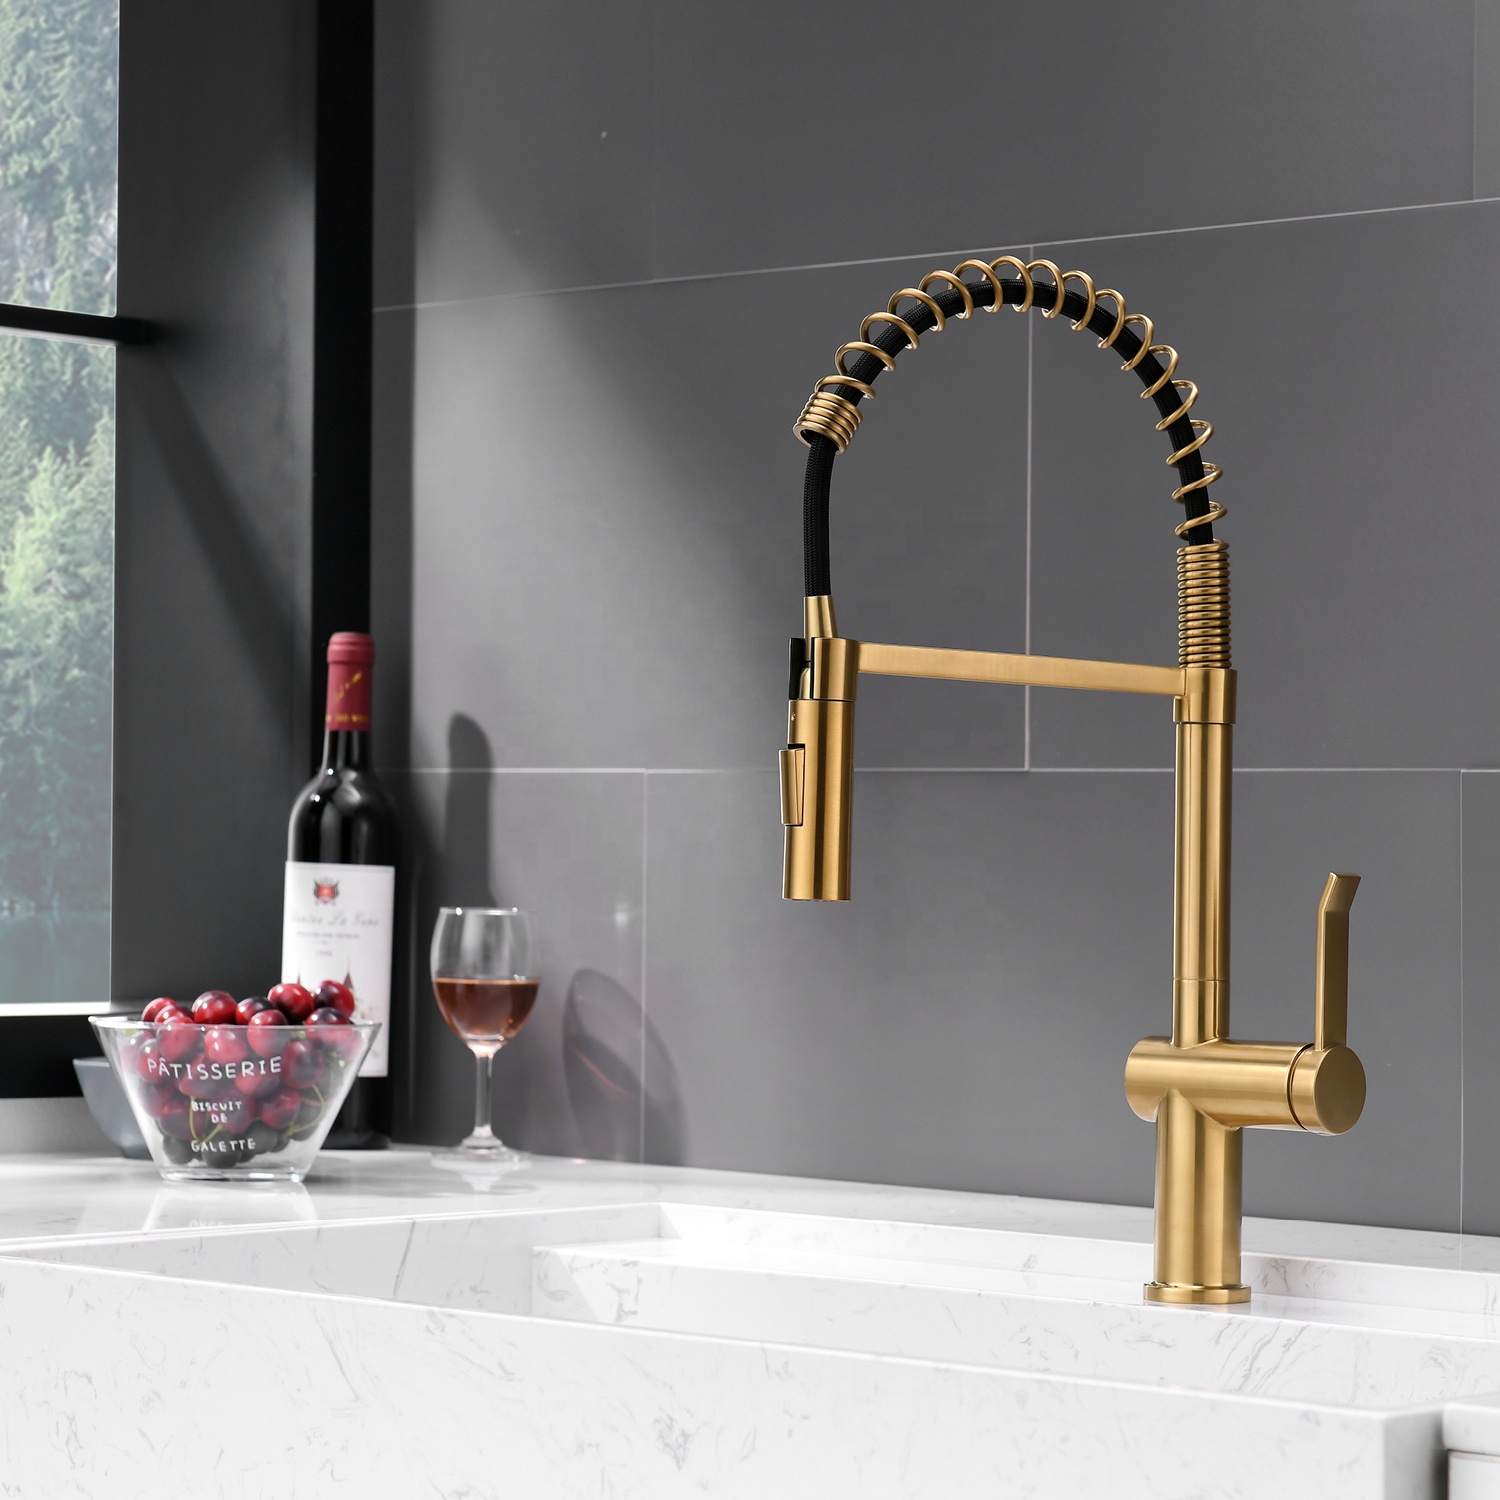 Spring Loaded Kitchen Sink Mixer Tap Faucets Gold Pull Down Kitchen Sink Faucet